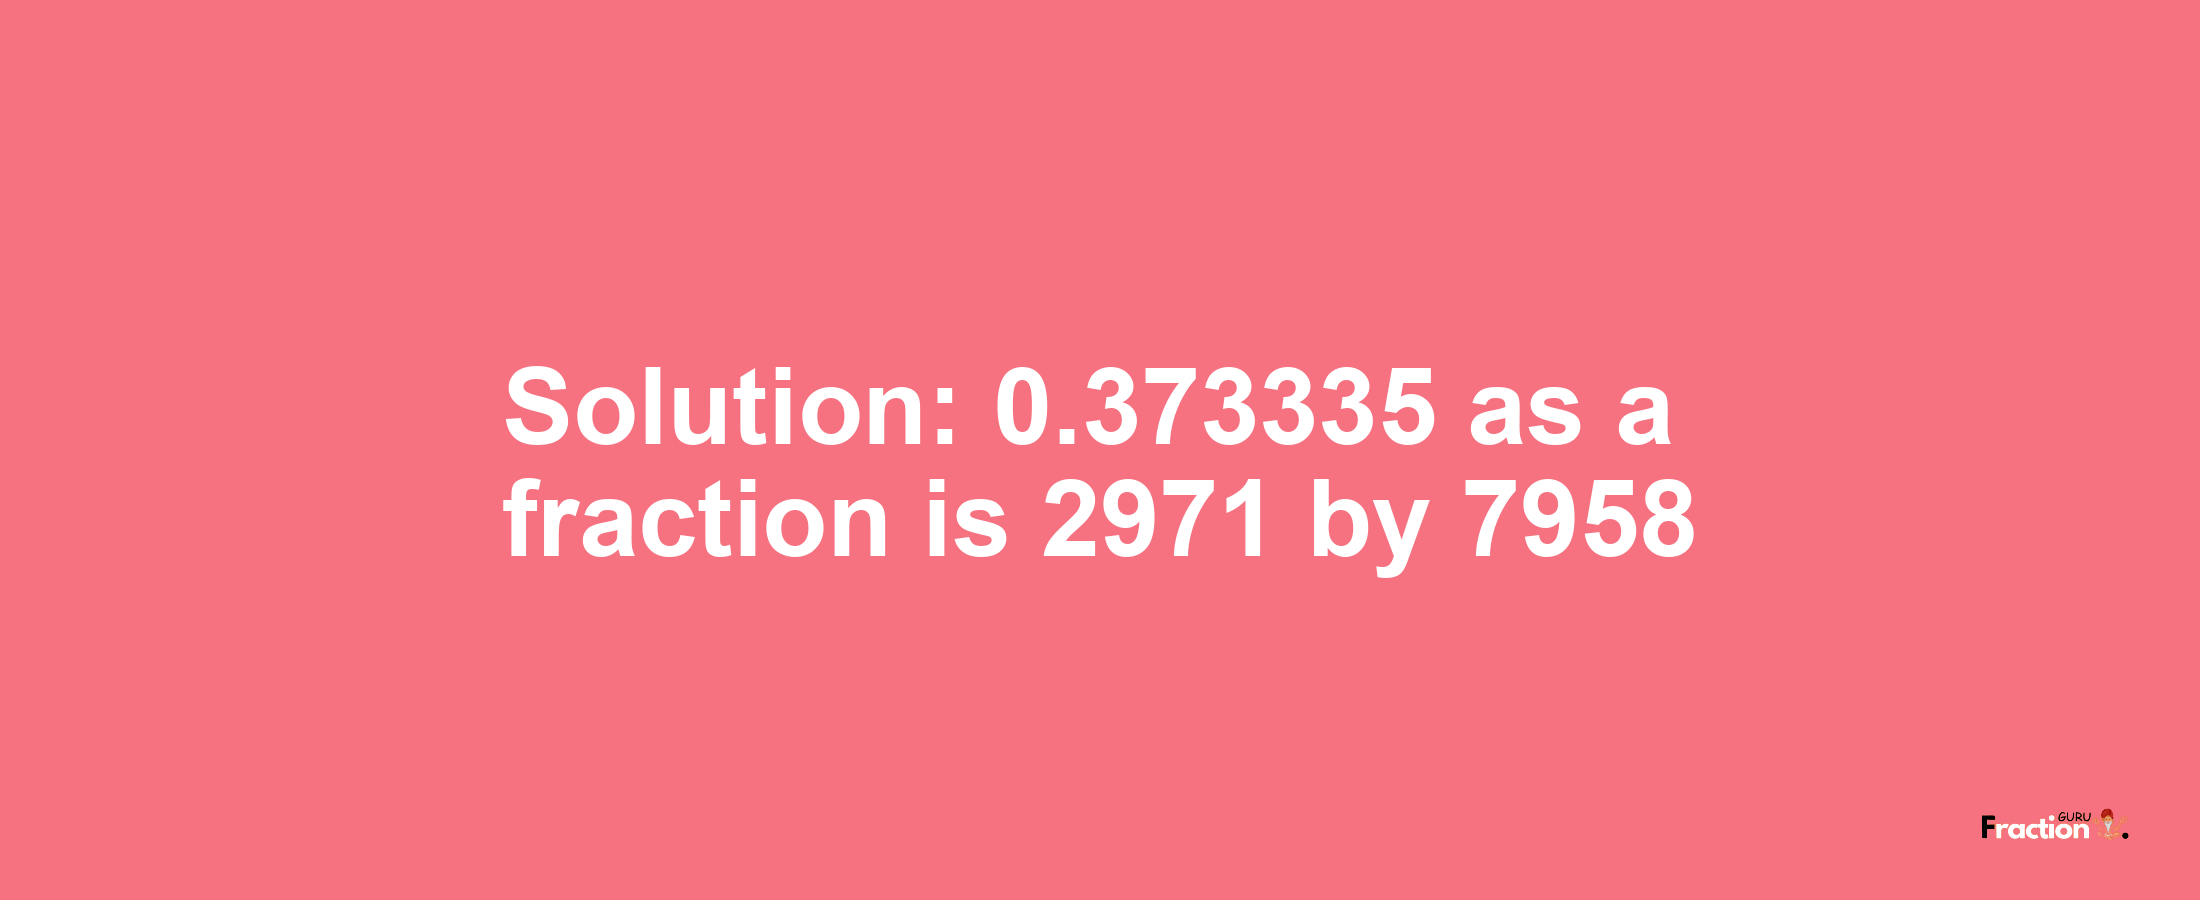 Solution:0.373335 as a fraction is 2971/7958